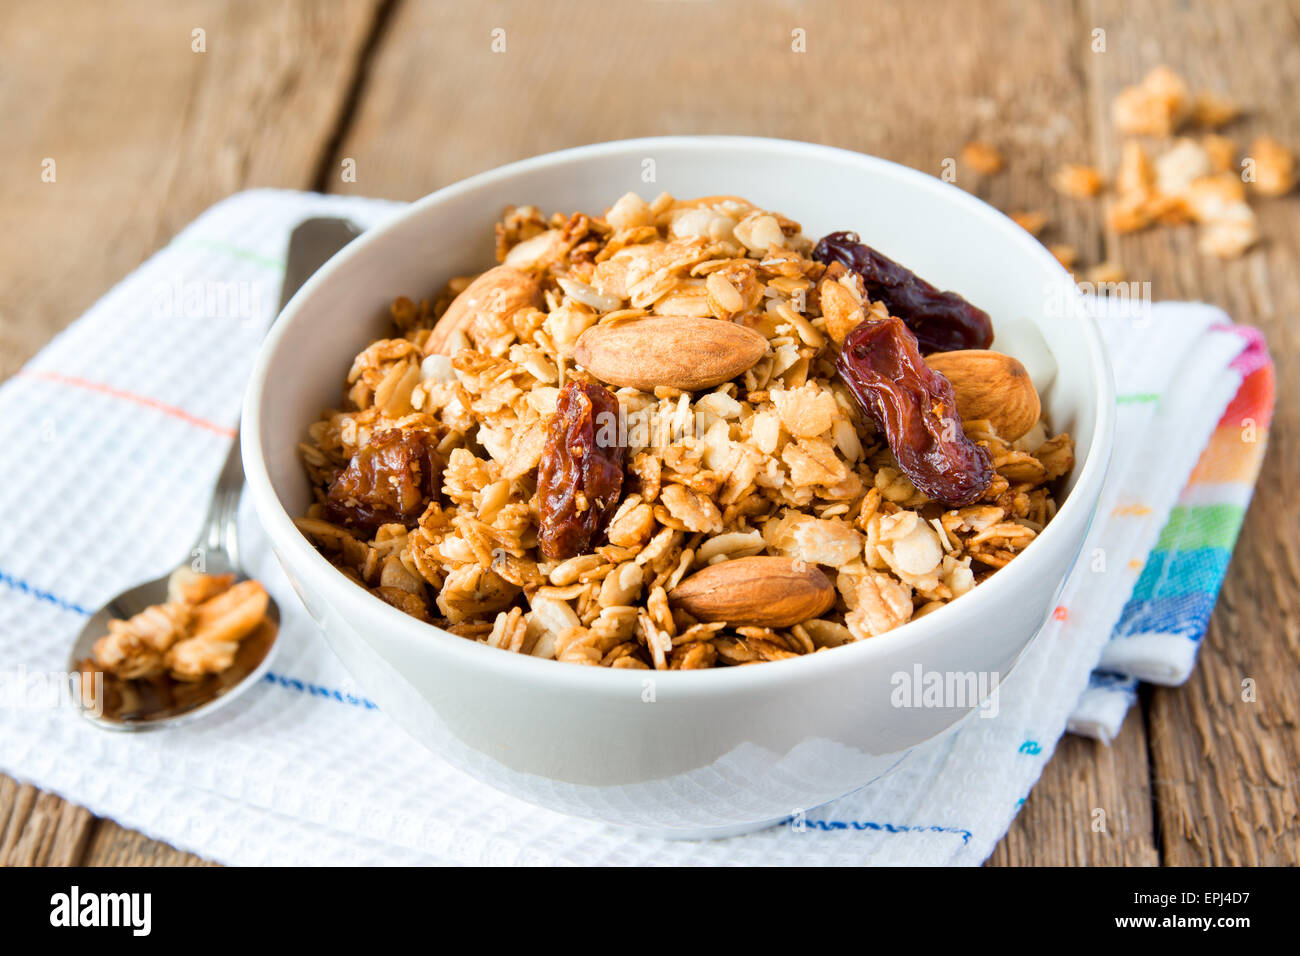 wholegrain muesli for breakfast, with lots of dry fruits, nuts and grains close up, horizontal, on wooden table with spoon Stock Photo